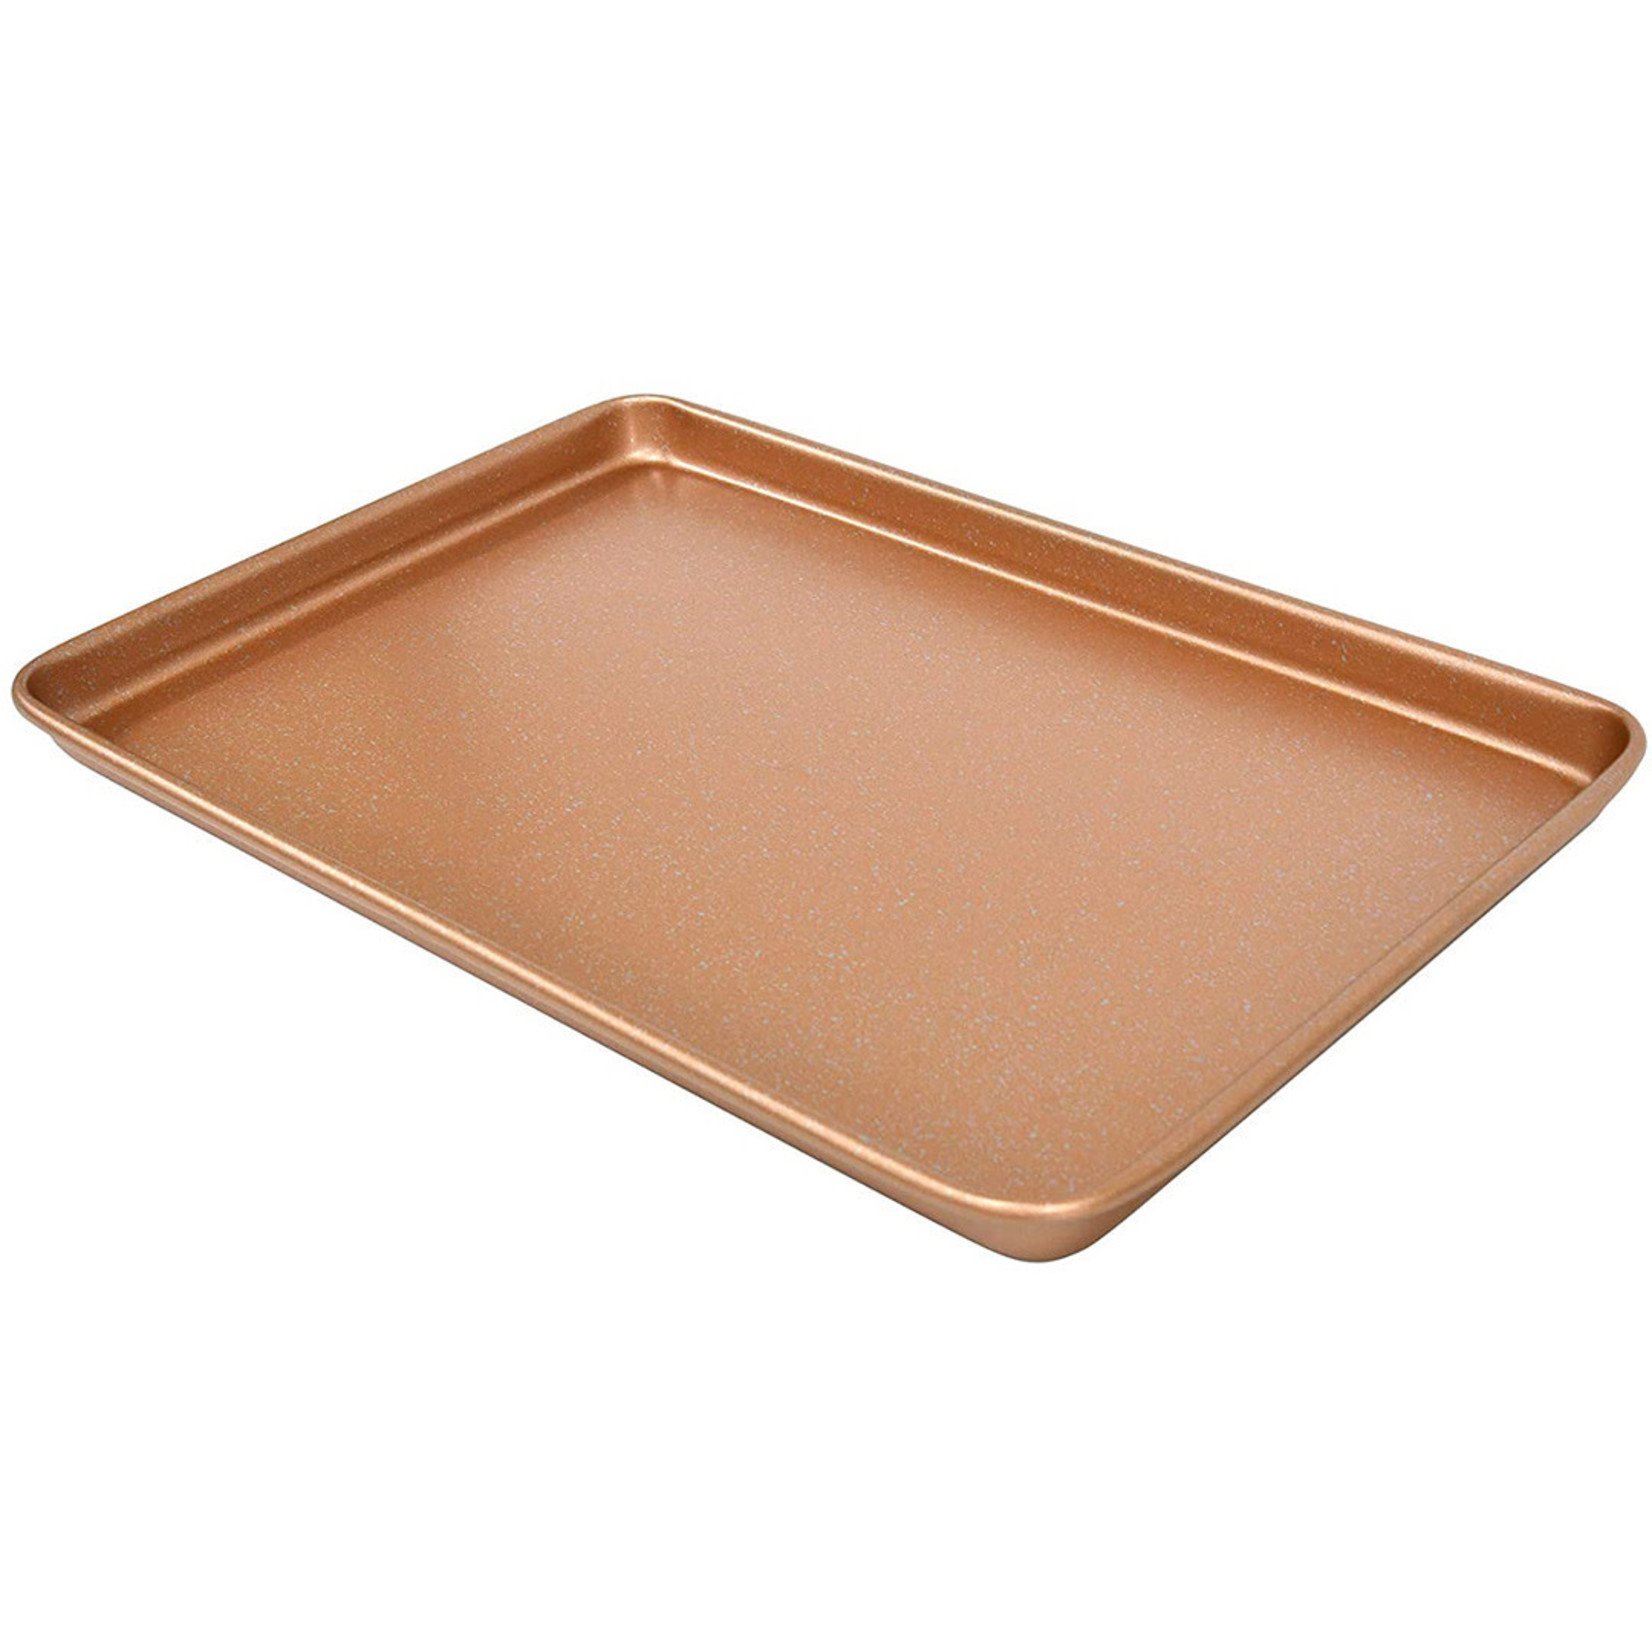 Cookie Sheet Ultimage - 15” x 10” - Rose Gold - The Fancy Frog Boutique